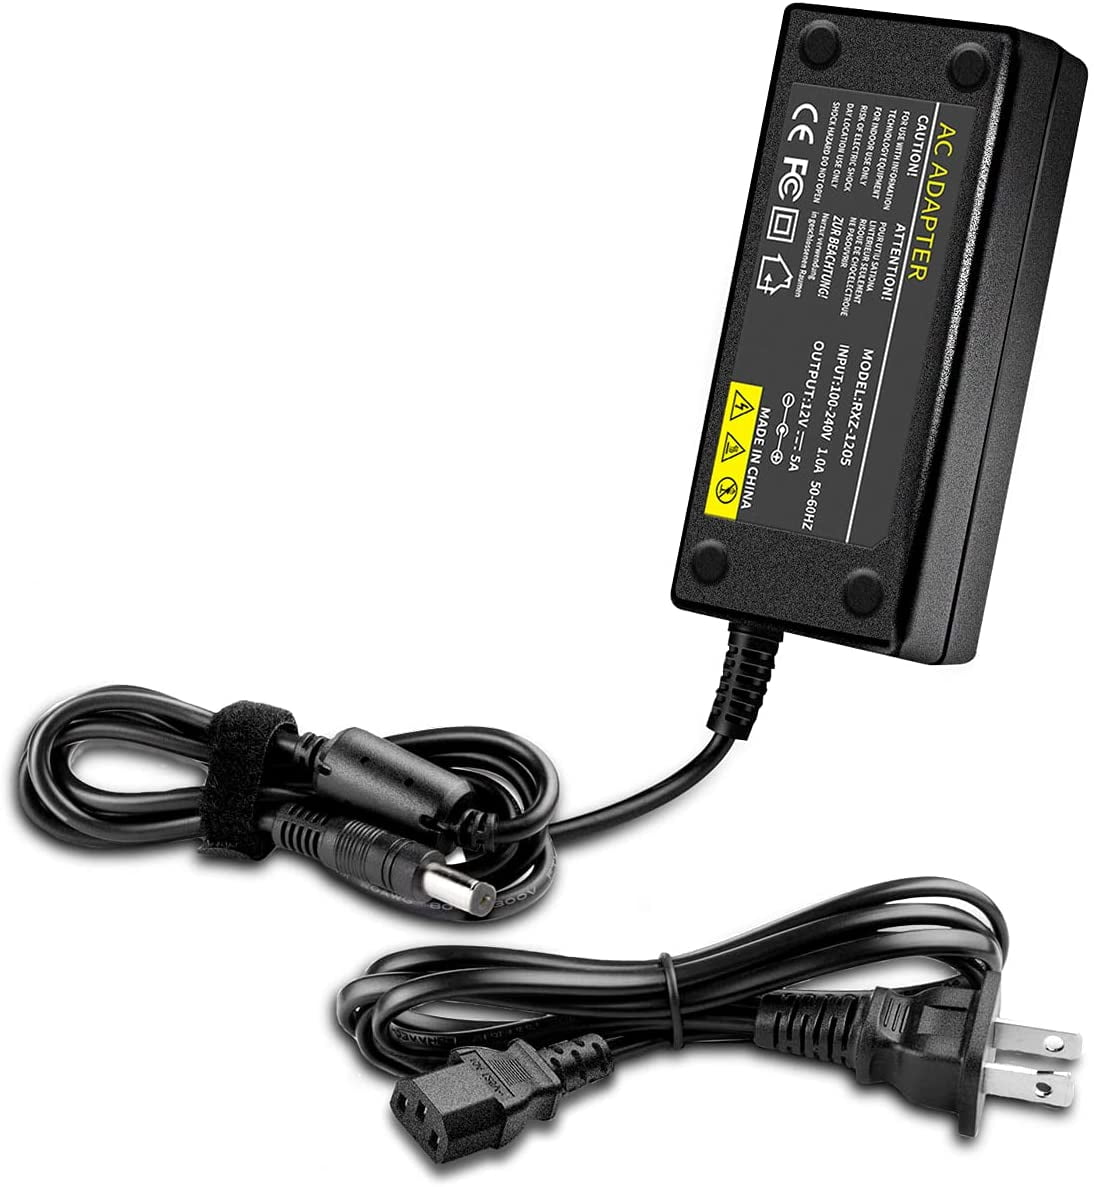 DC 12V 1A Power Supply Adapter Charger light for LED Strips for CCTV Camera SAA 